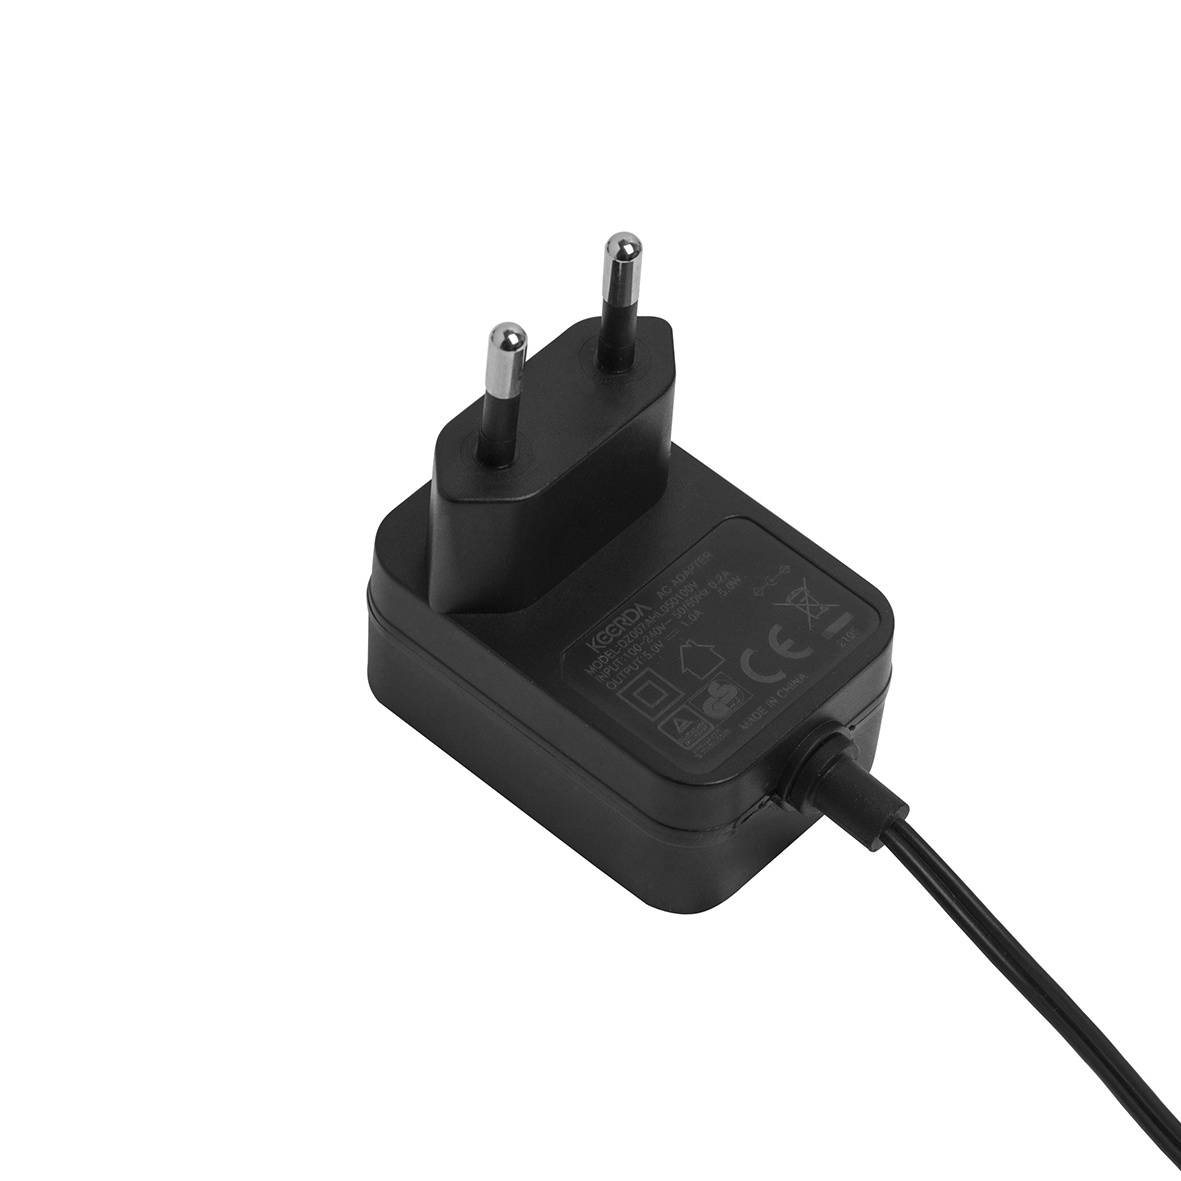 7W  5V1A POWER ADAPTER